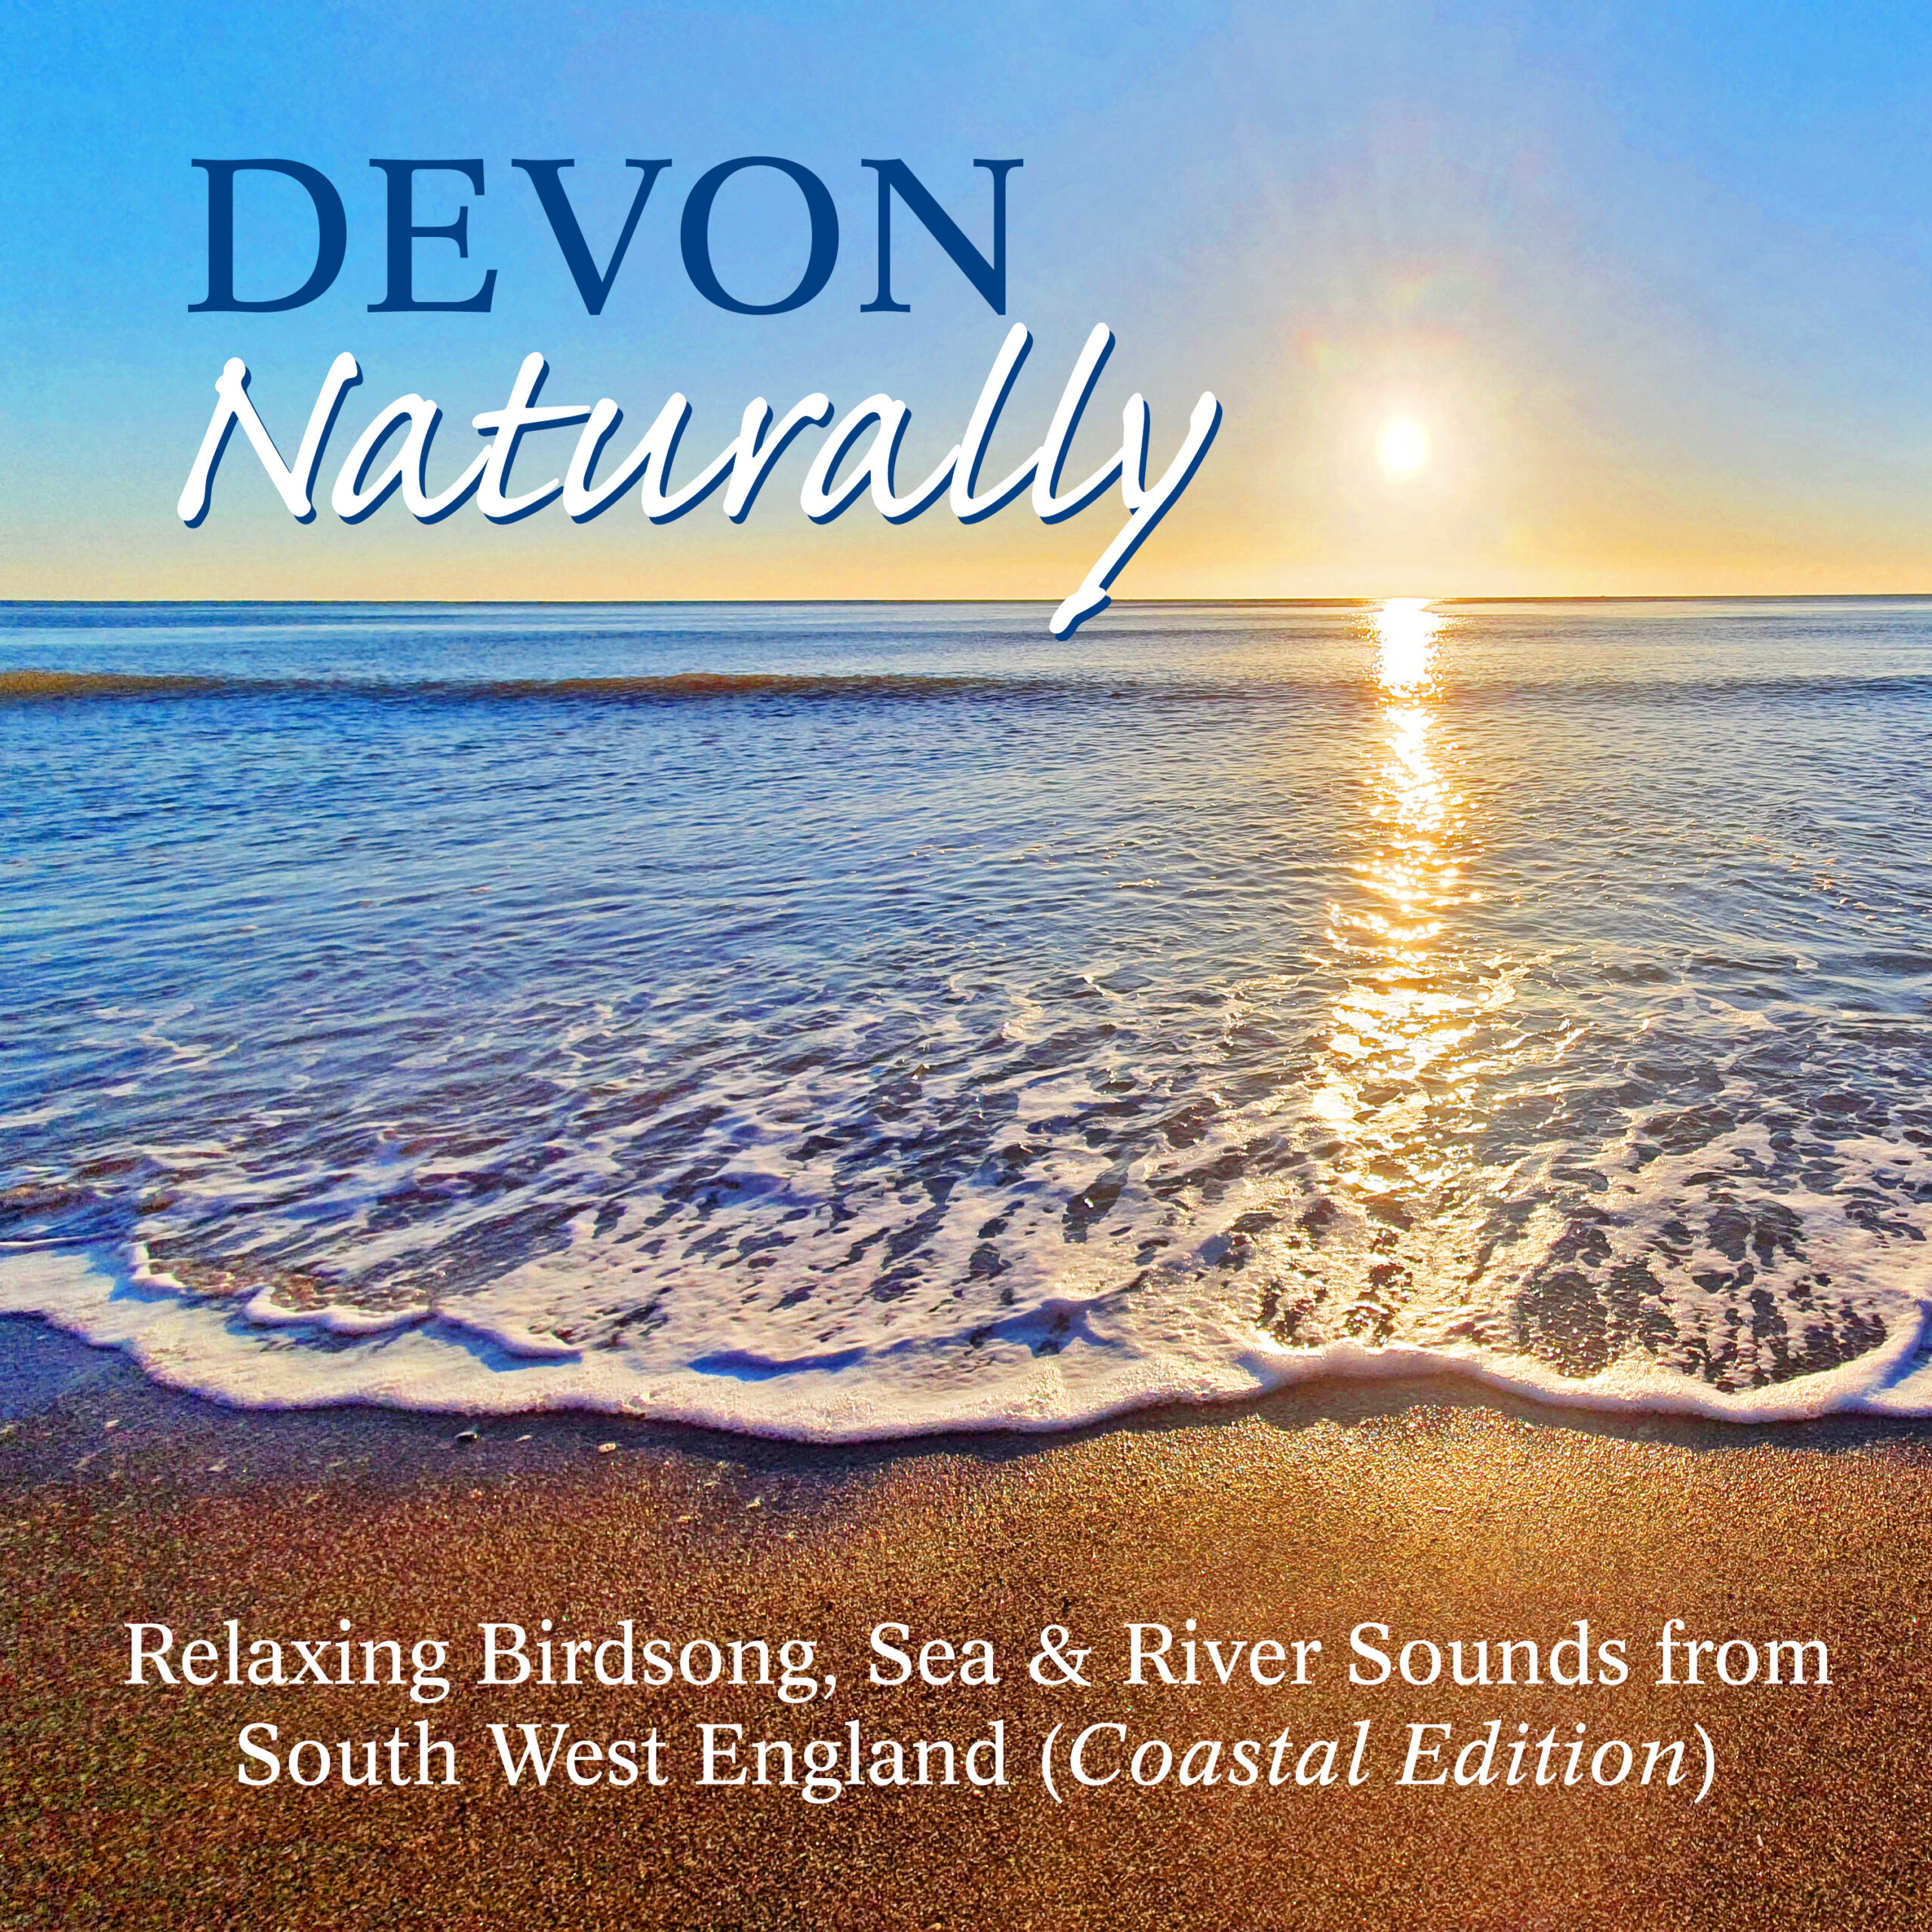 The artwork for Devon Naturally (Coastal Edition) by Symbiosis